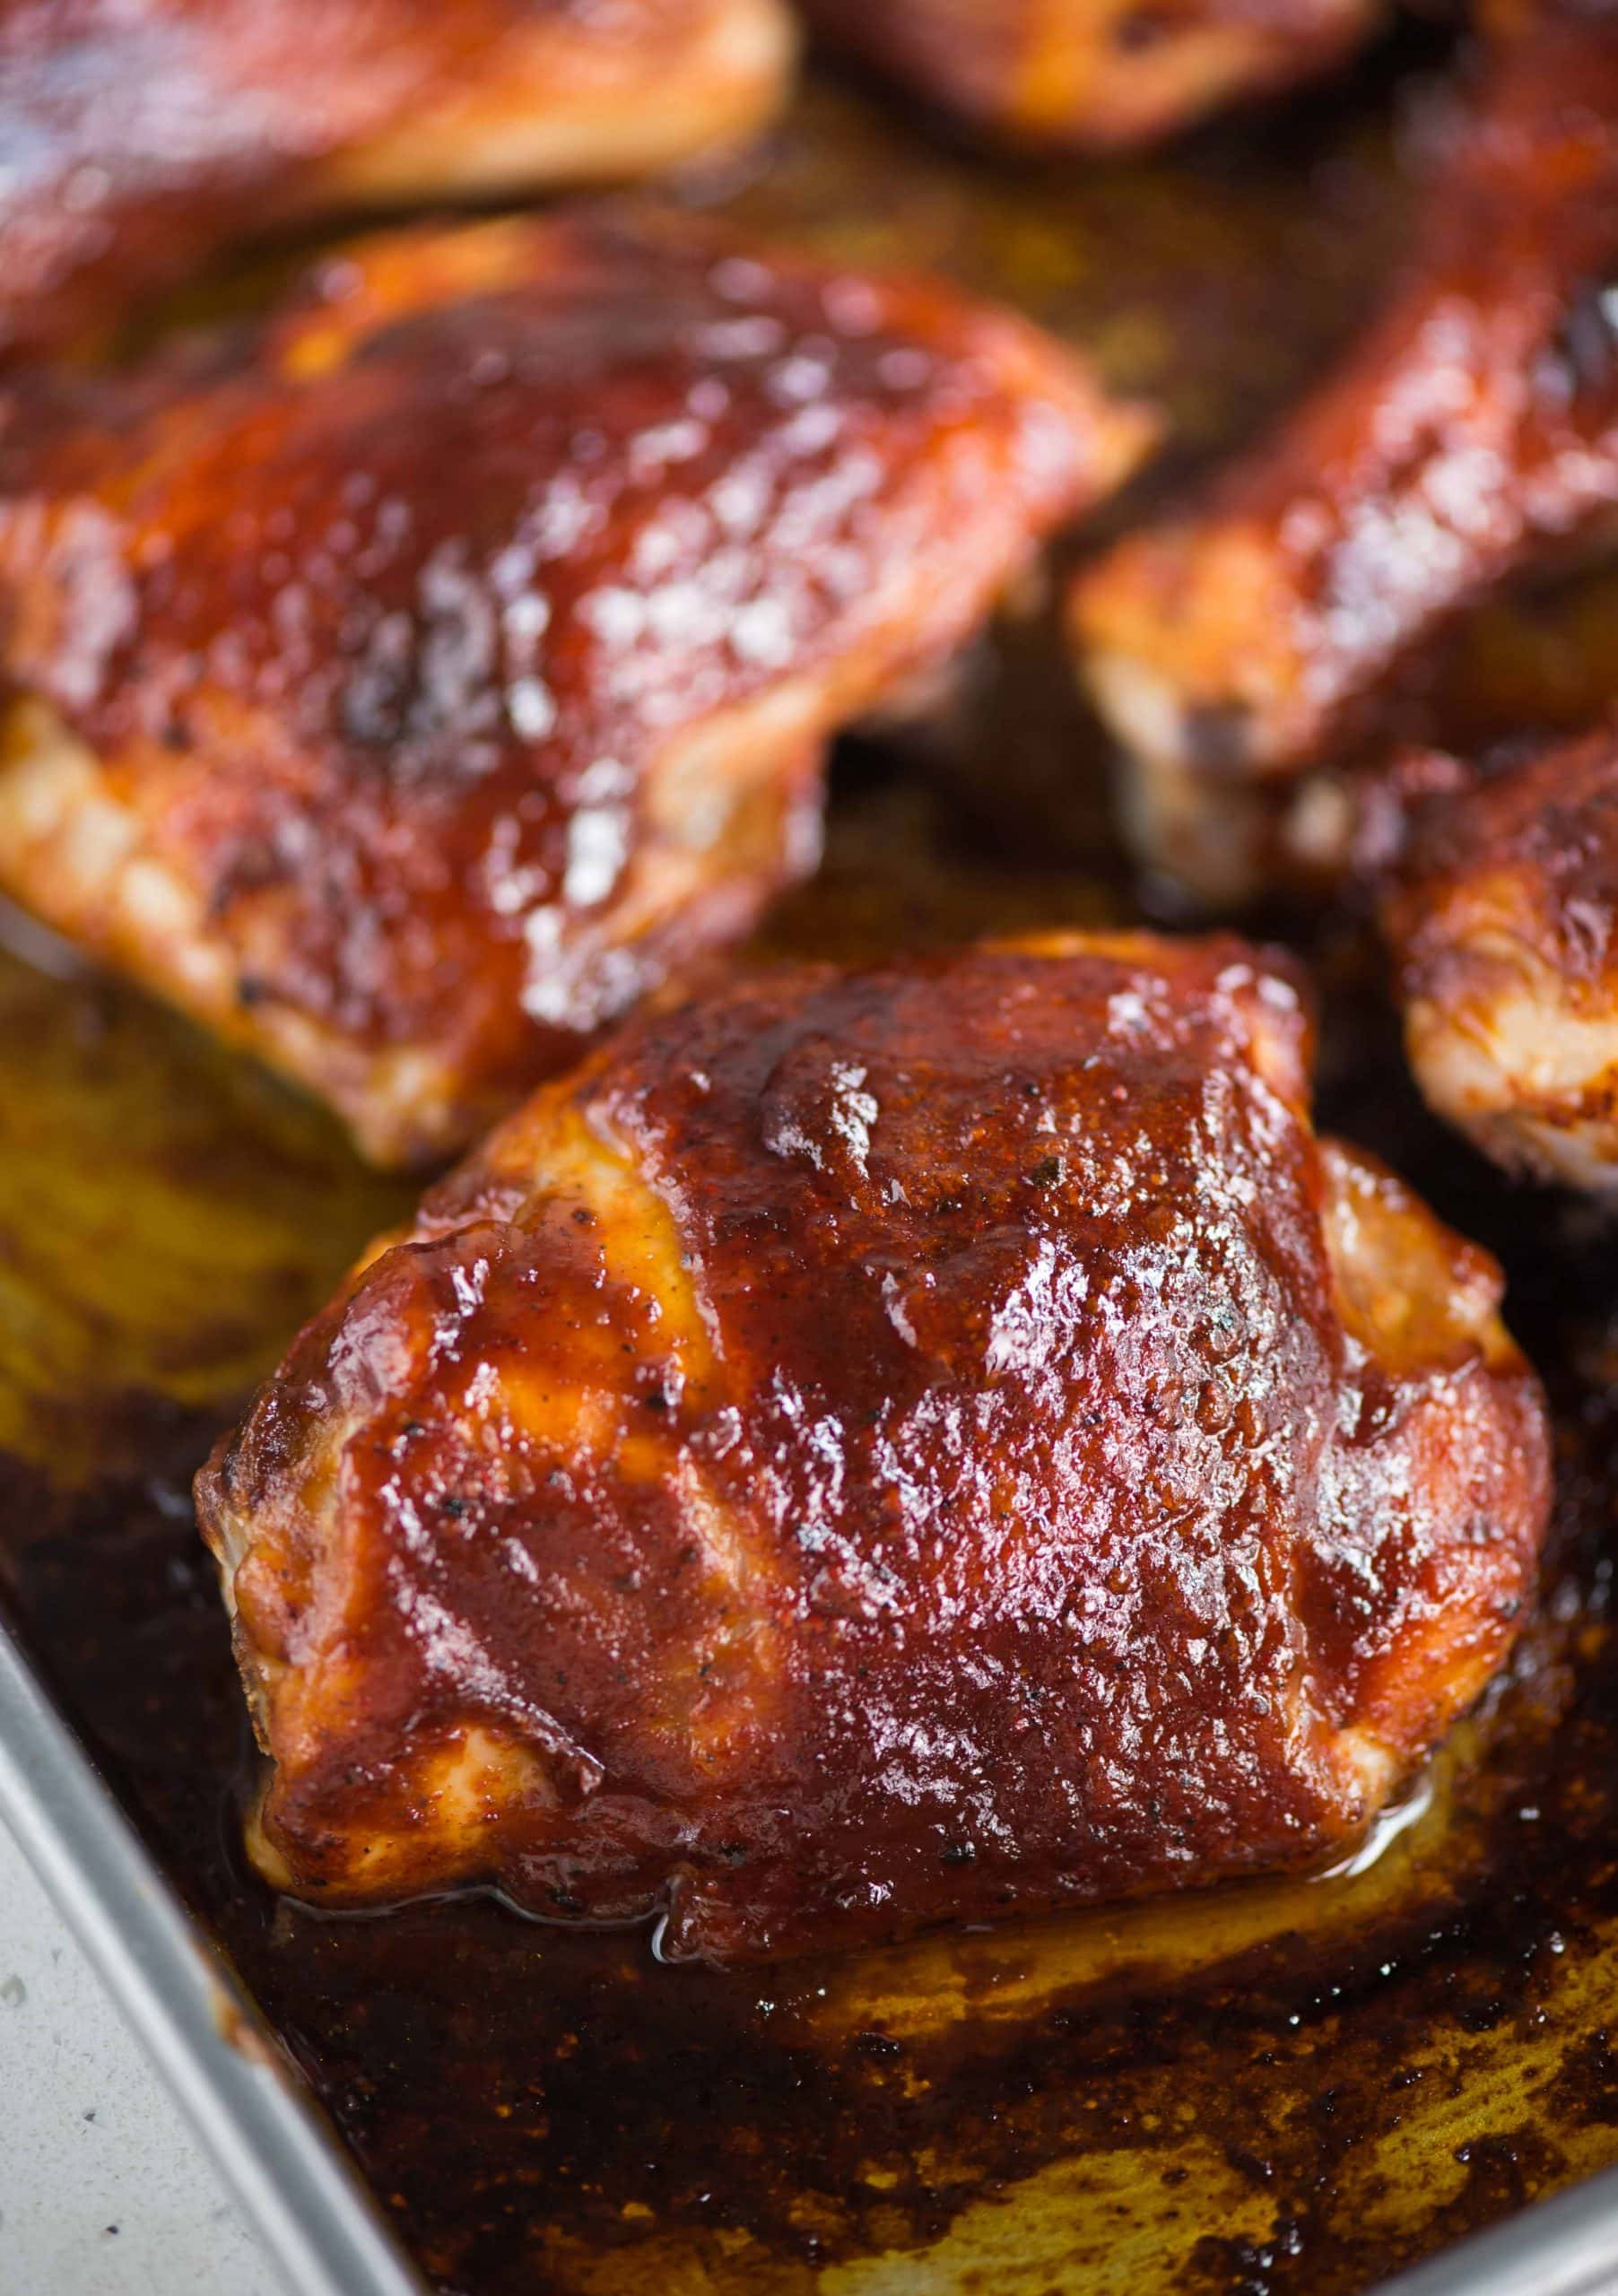 Sweet, smokey and perfectly Juicy, these Oven Baked BBQ Chicken has outdoor summer grilling vibes. Easy to make with a handful of ingredients and a family-friendly dinner for sure.  